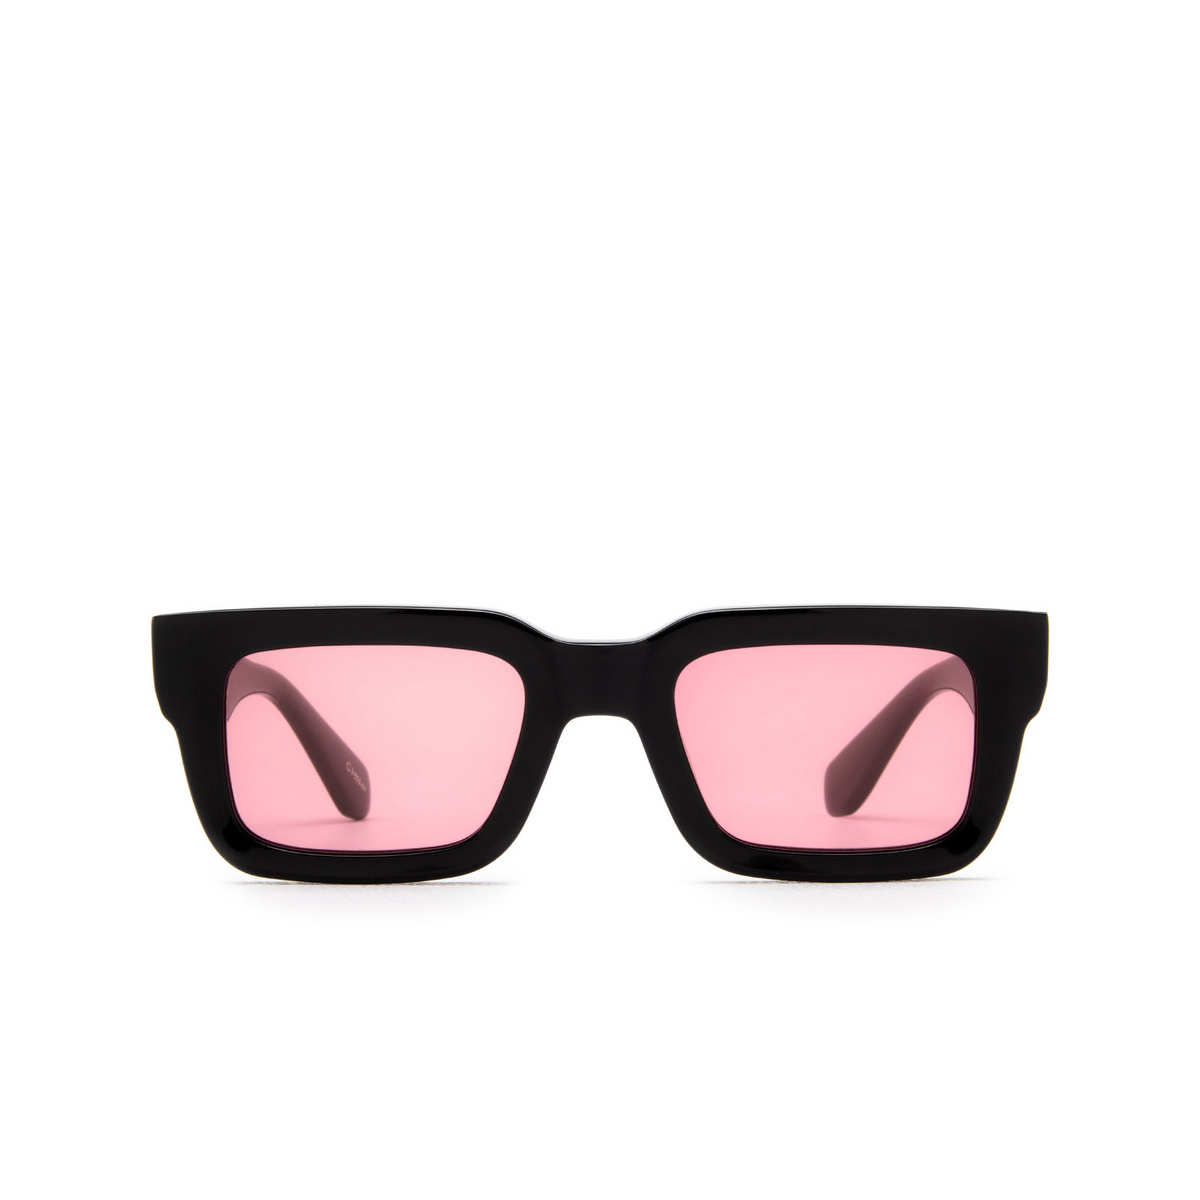 Chimi 05 Sunglasses BLACK PINK - front view